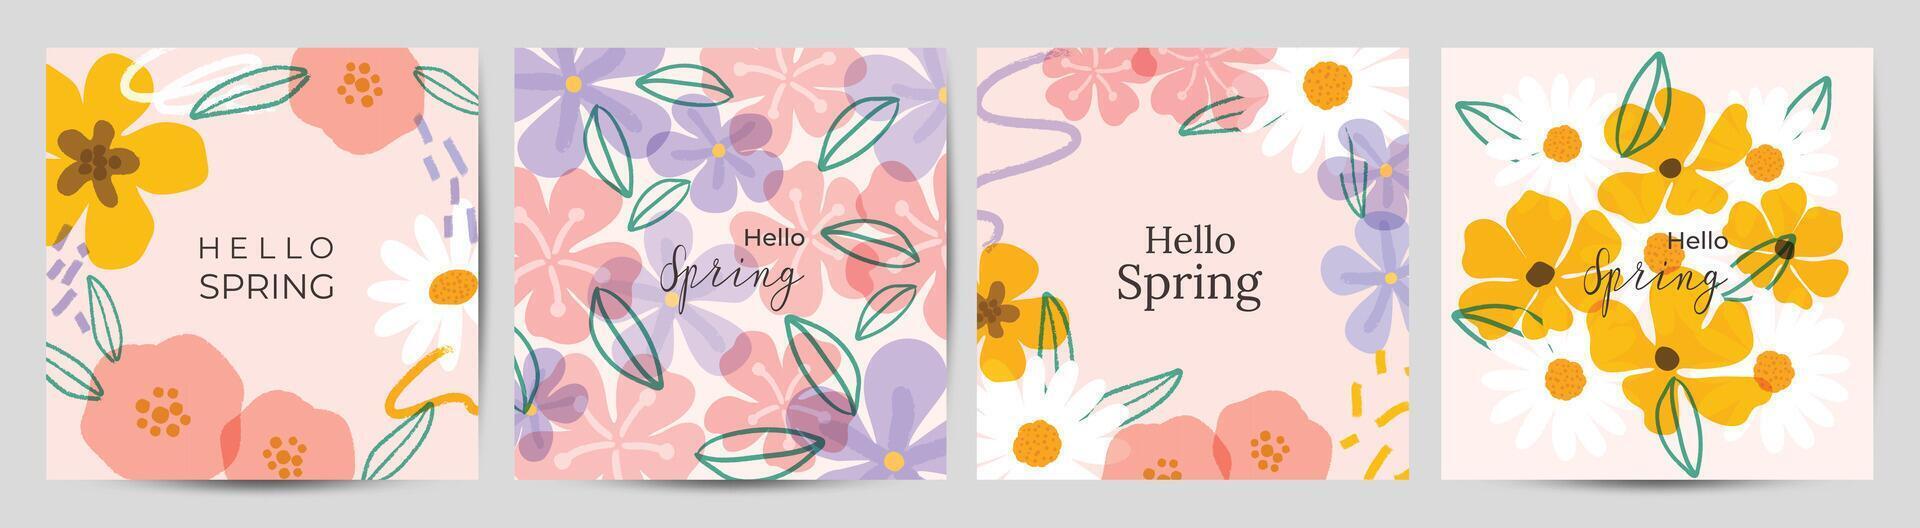 Spring season floral square cover vector. Set of banner design with flowers, leaves, branch. Colorful blossom background for social media post, website, business, ads. vector